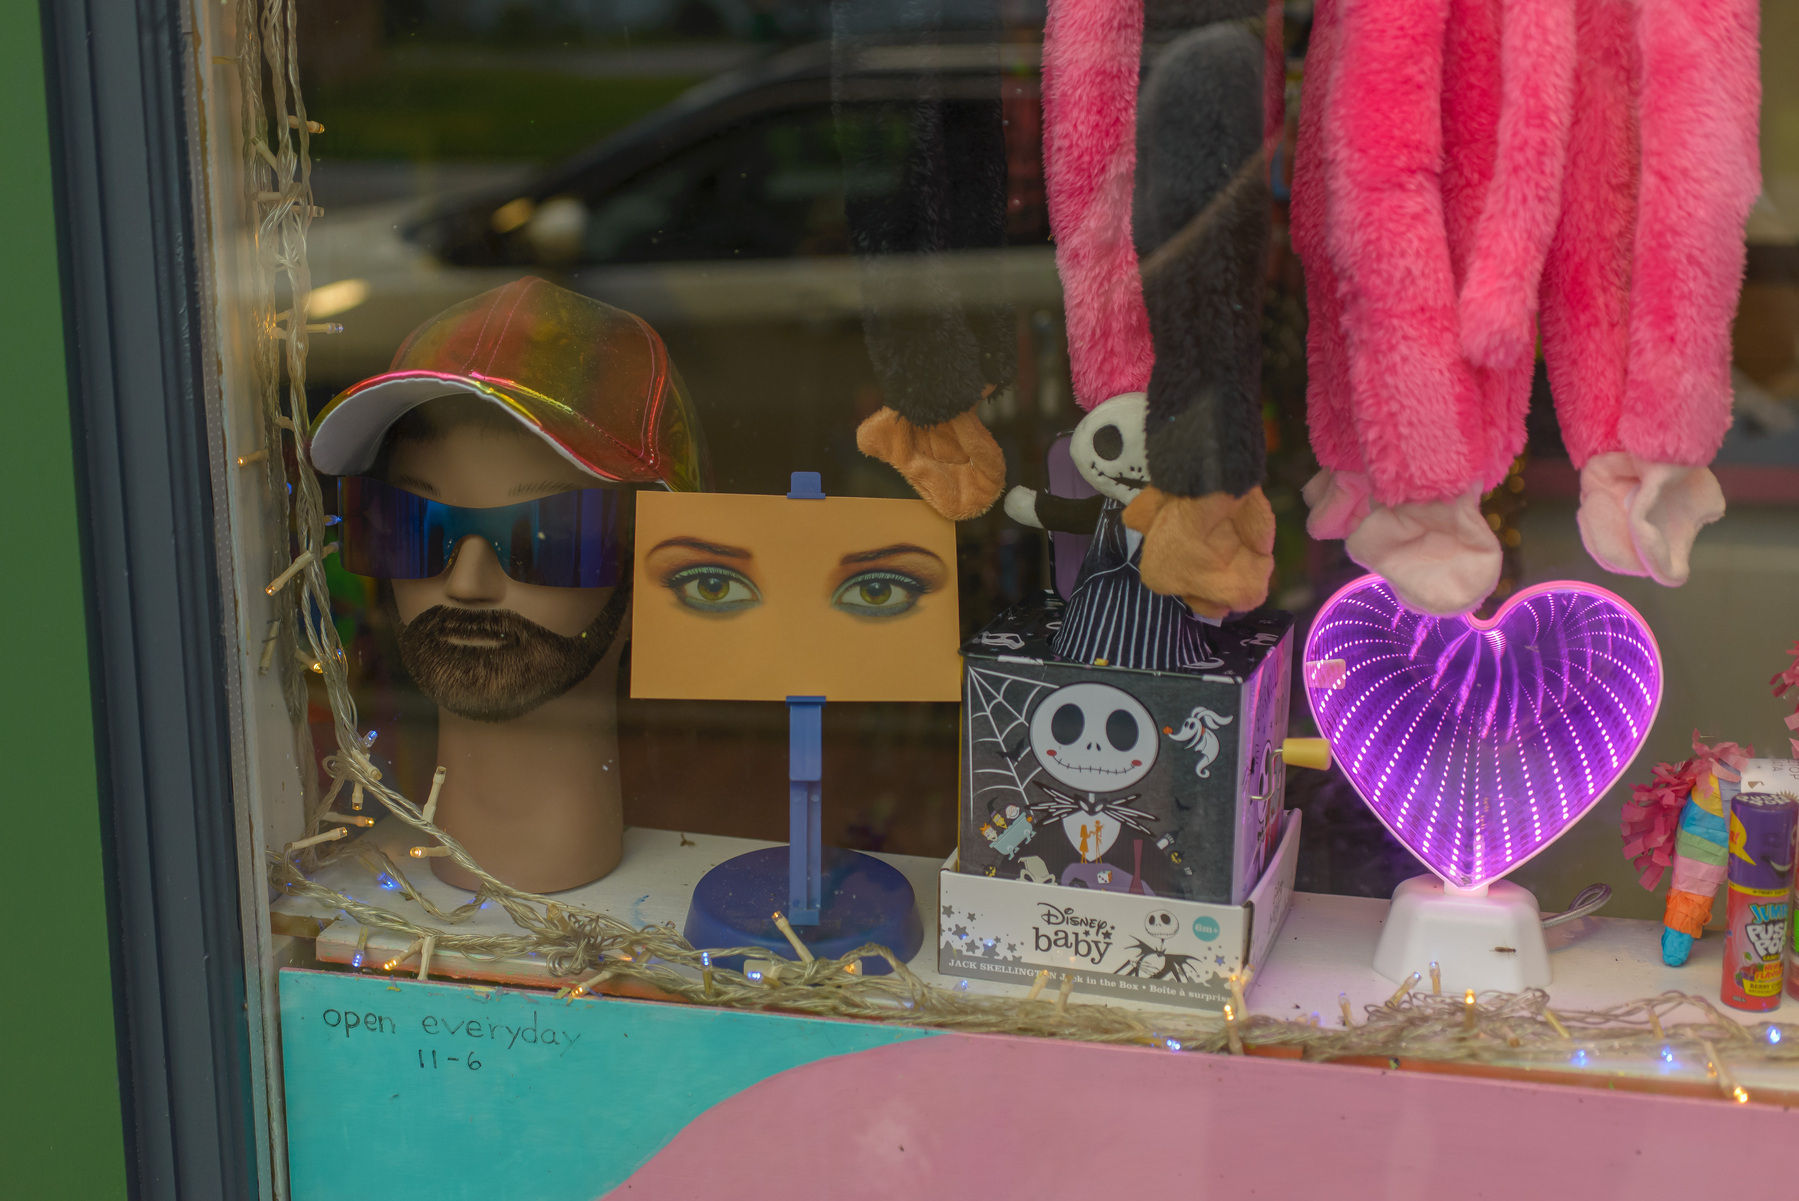 Miscellaneous items in a novelty store, including a heart wit depth of space illusion, a Jack Skellington in a box, a pair of feminine eyes, and a male head form with beard, sunglasses and gold metallic hat.